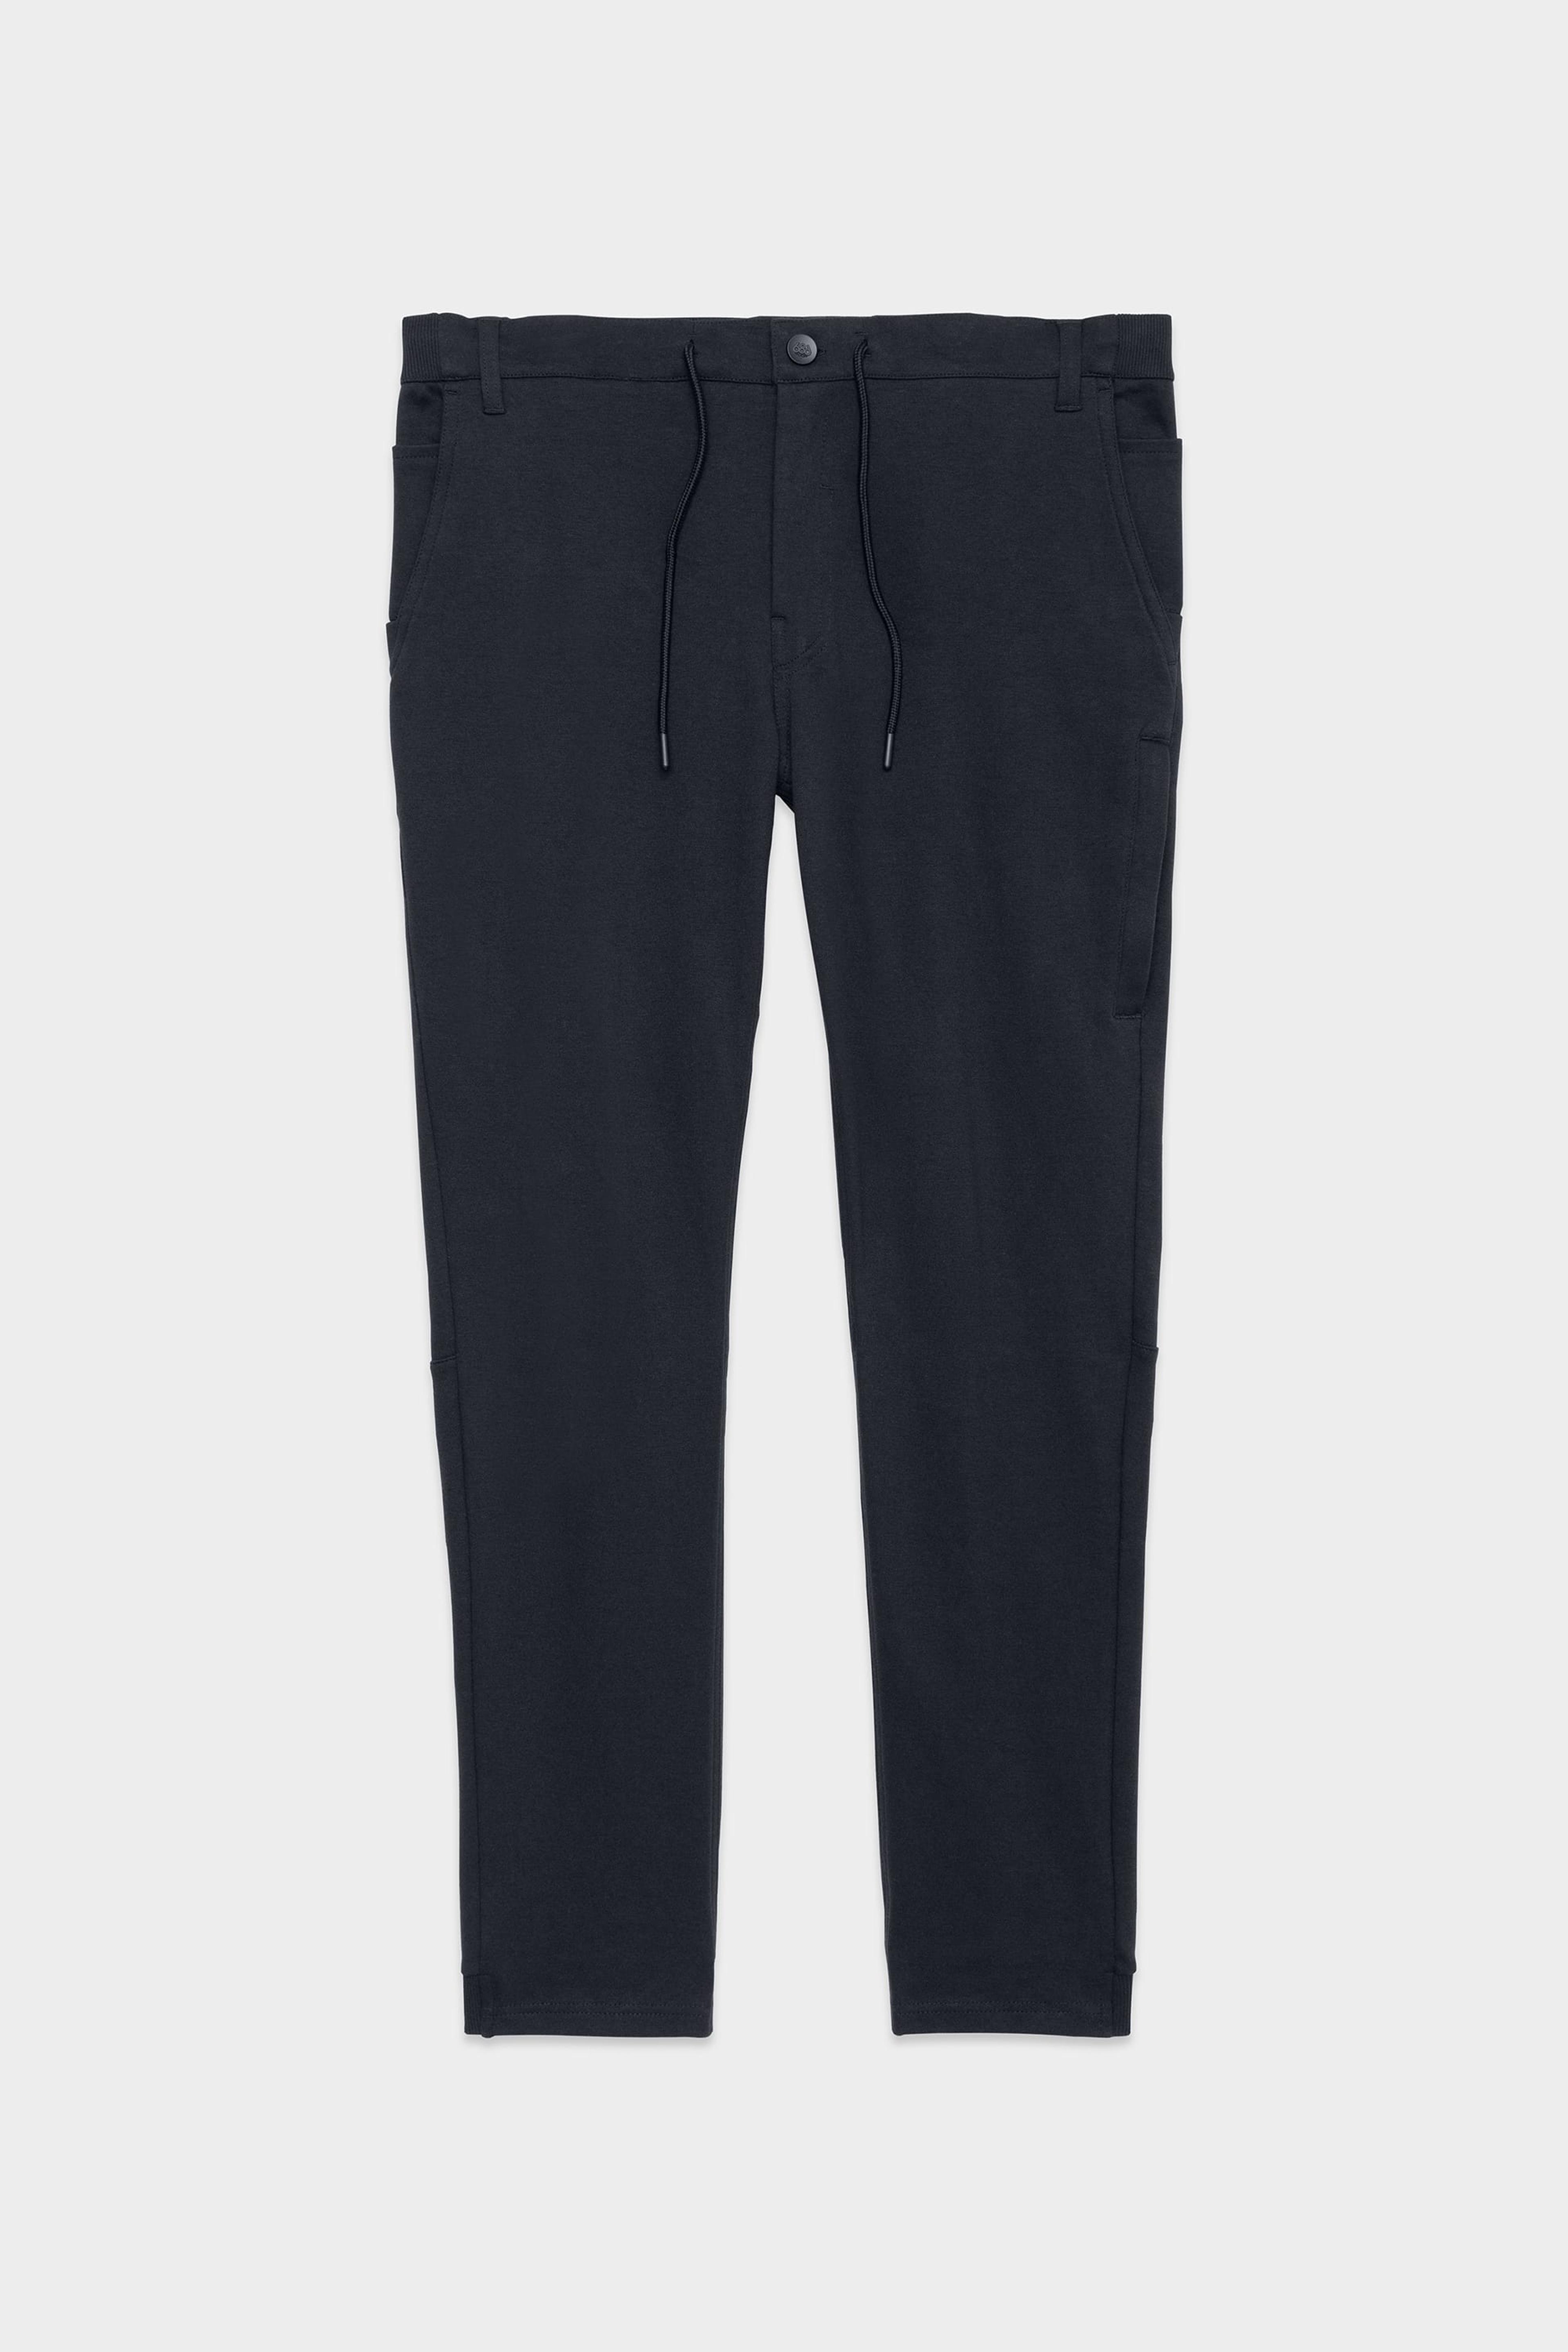 Alternate View 2 of 686 Men's Everywhere Double Knit Pant